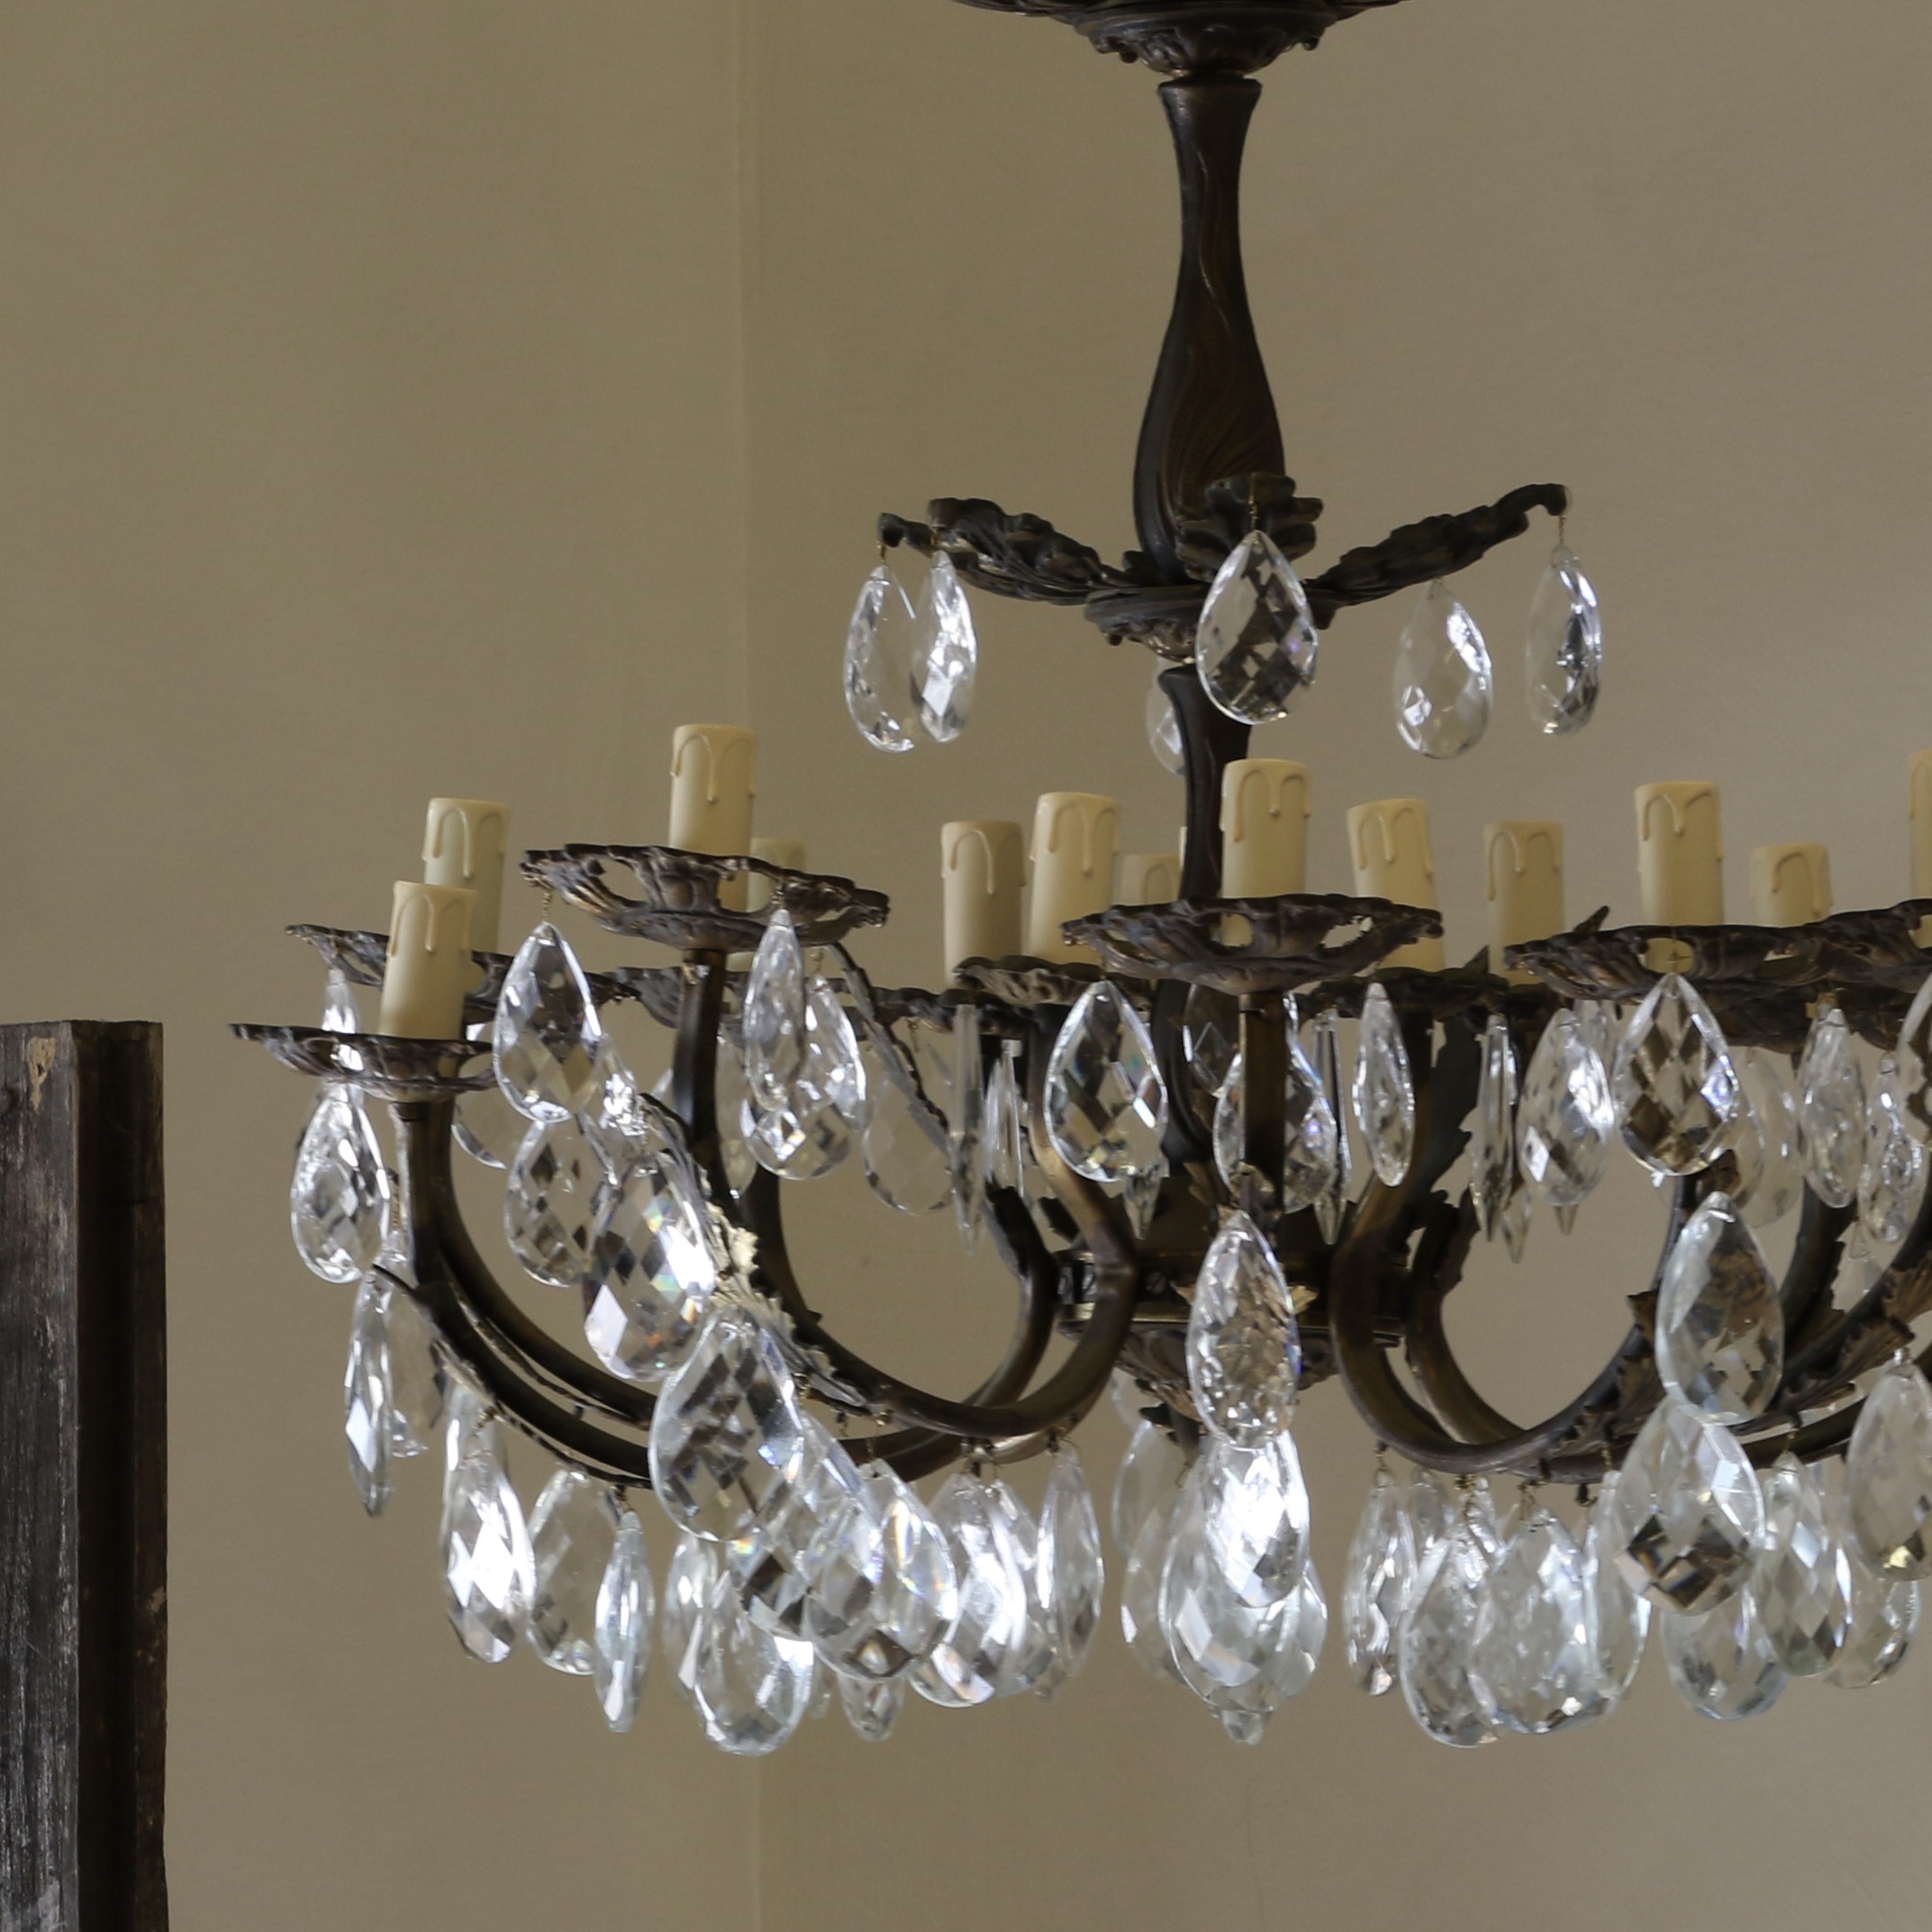 A French Antique Chandelier